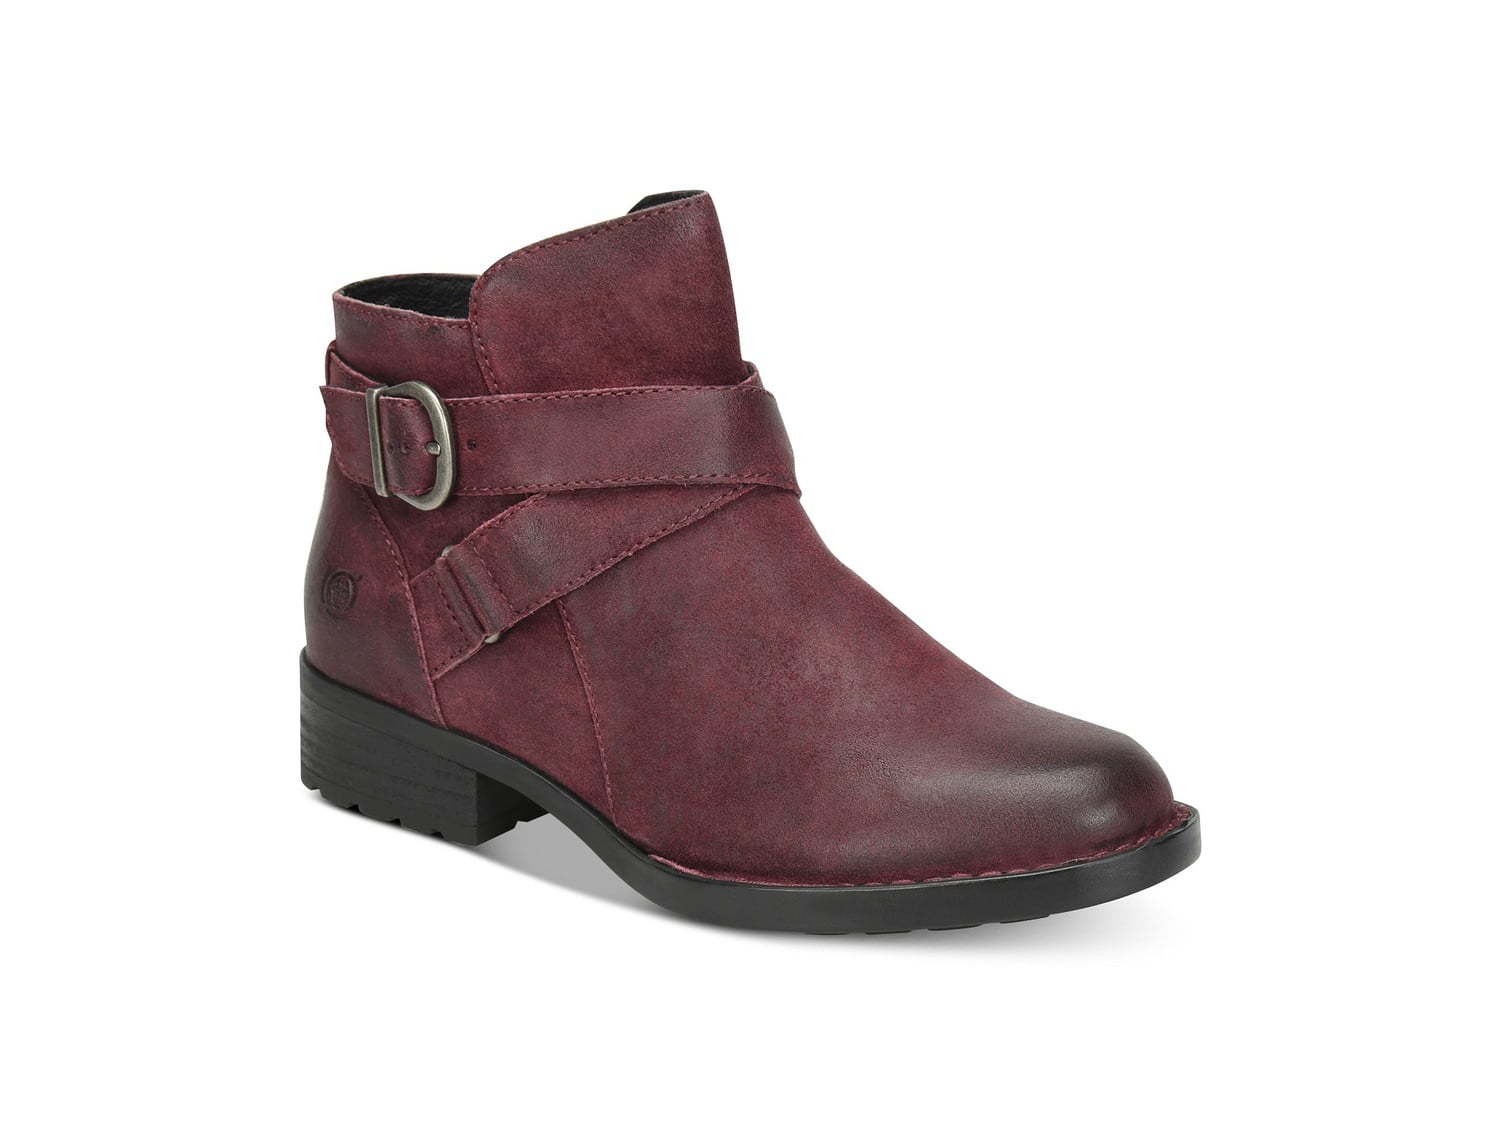 born chaval ankle boots